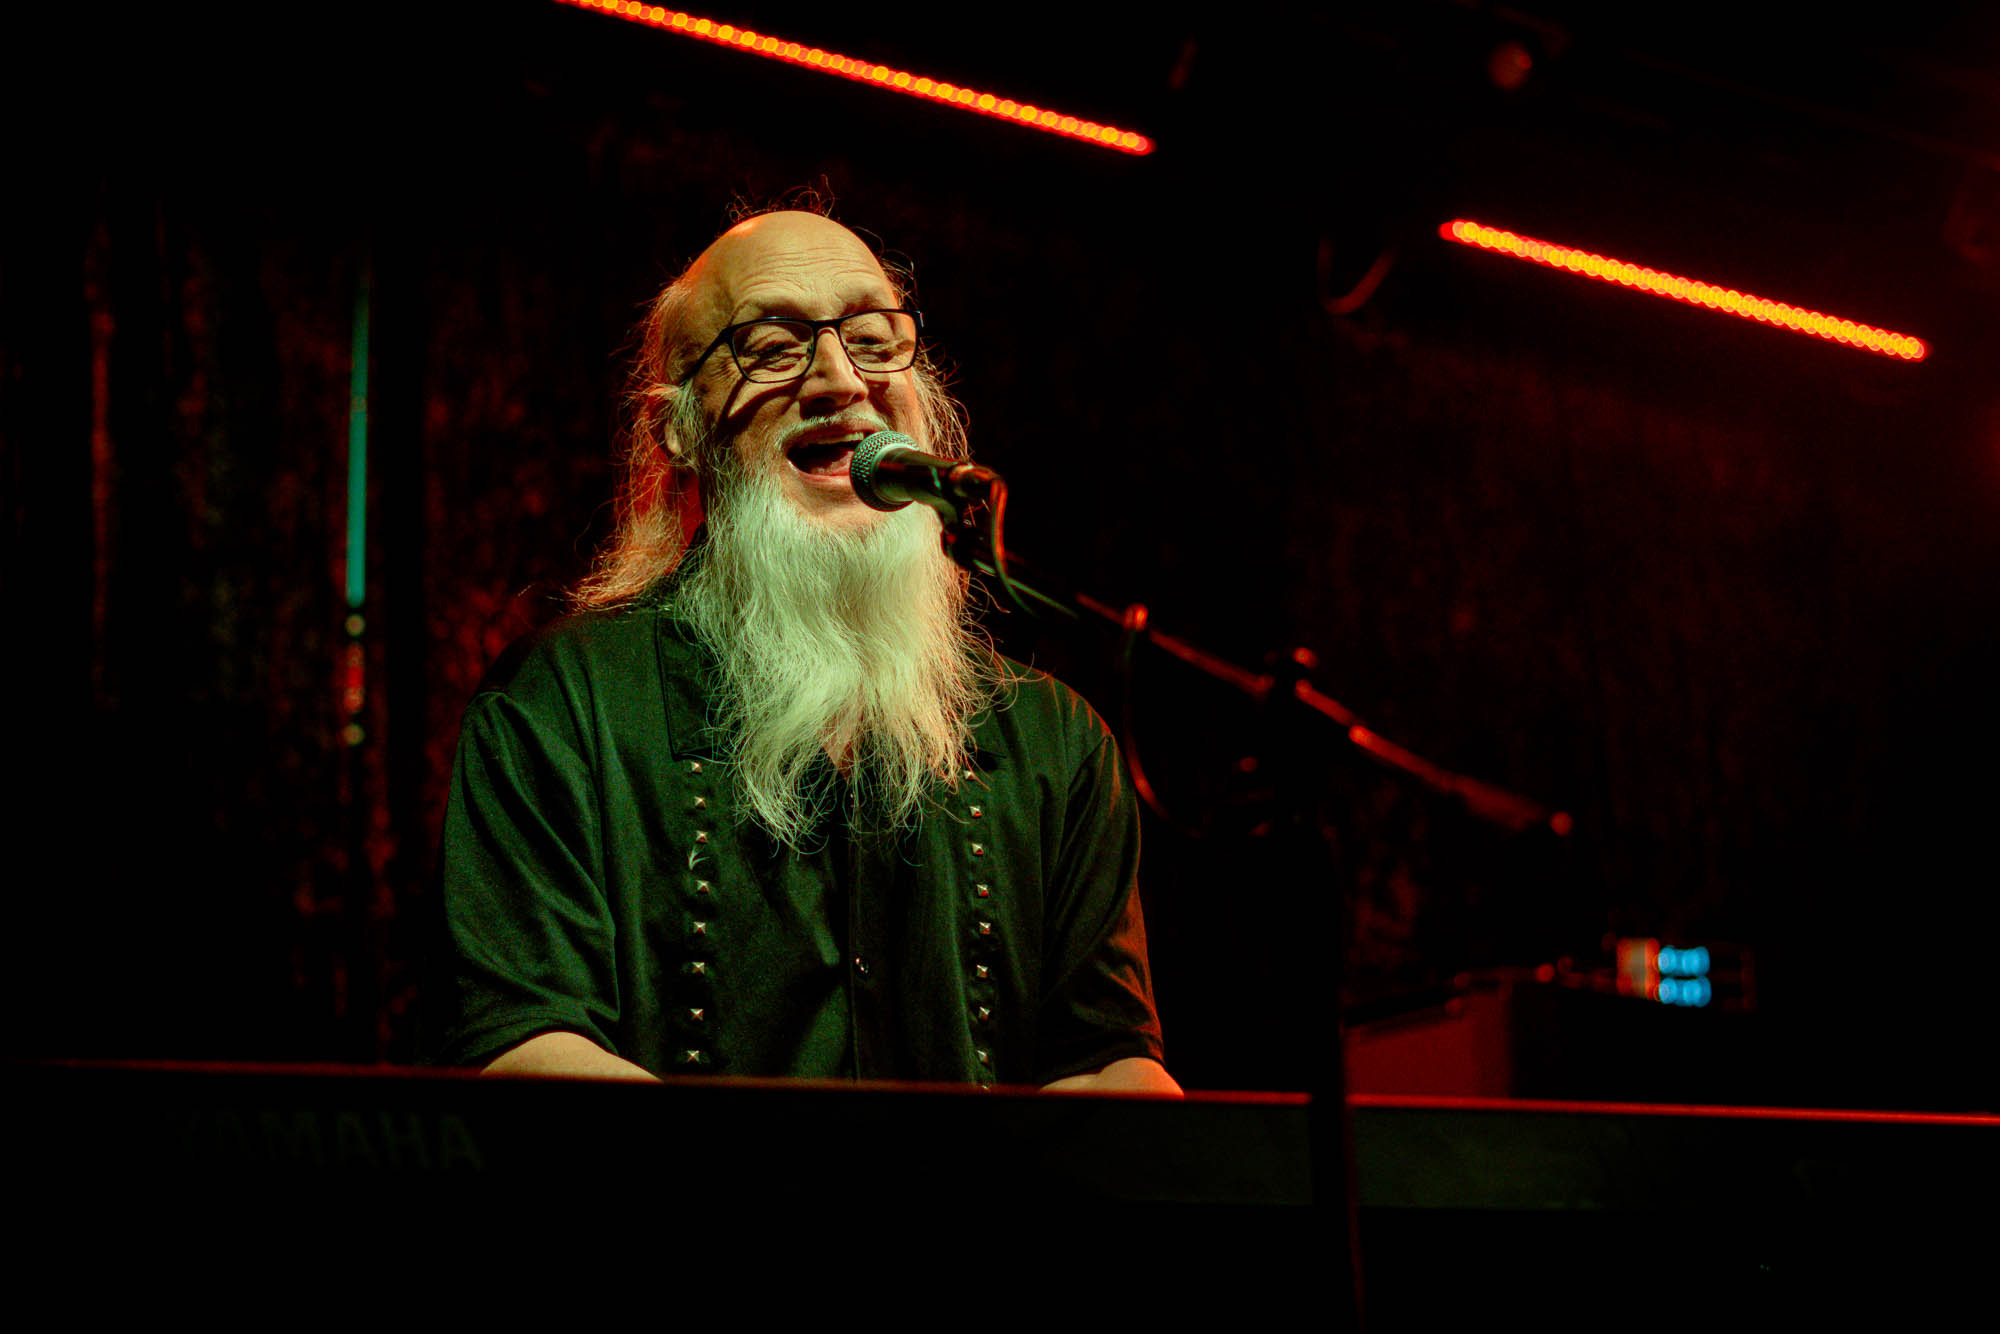 A musician playing keyboard on stage and singing